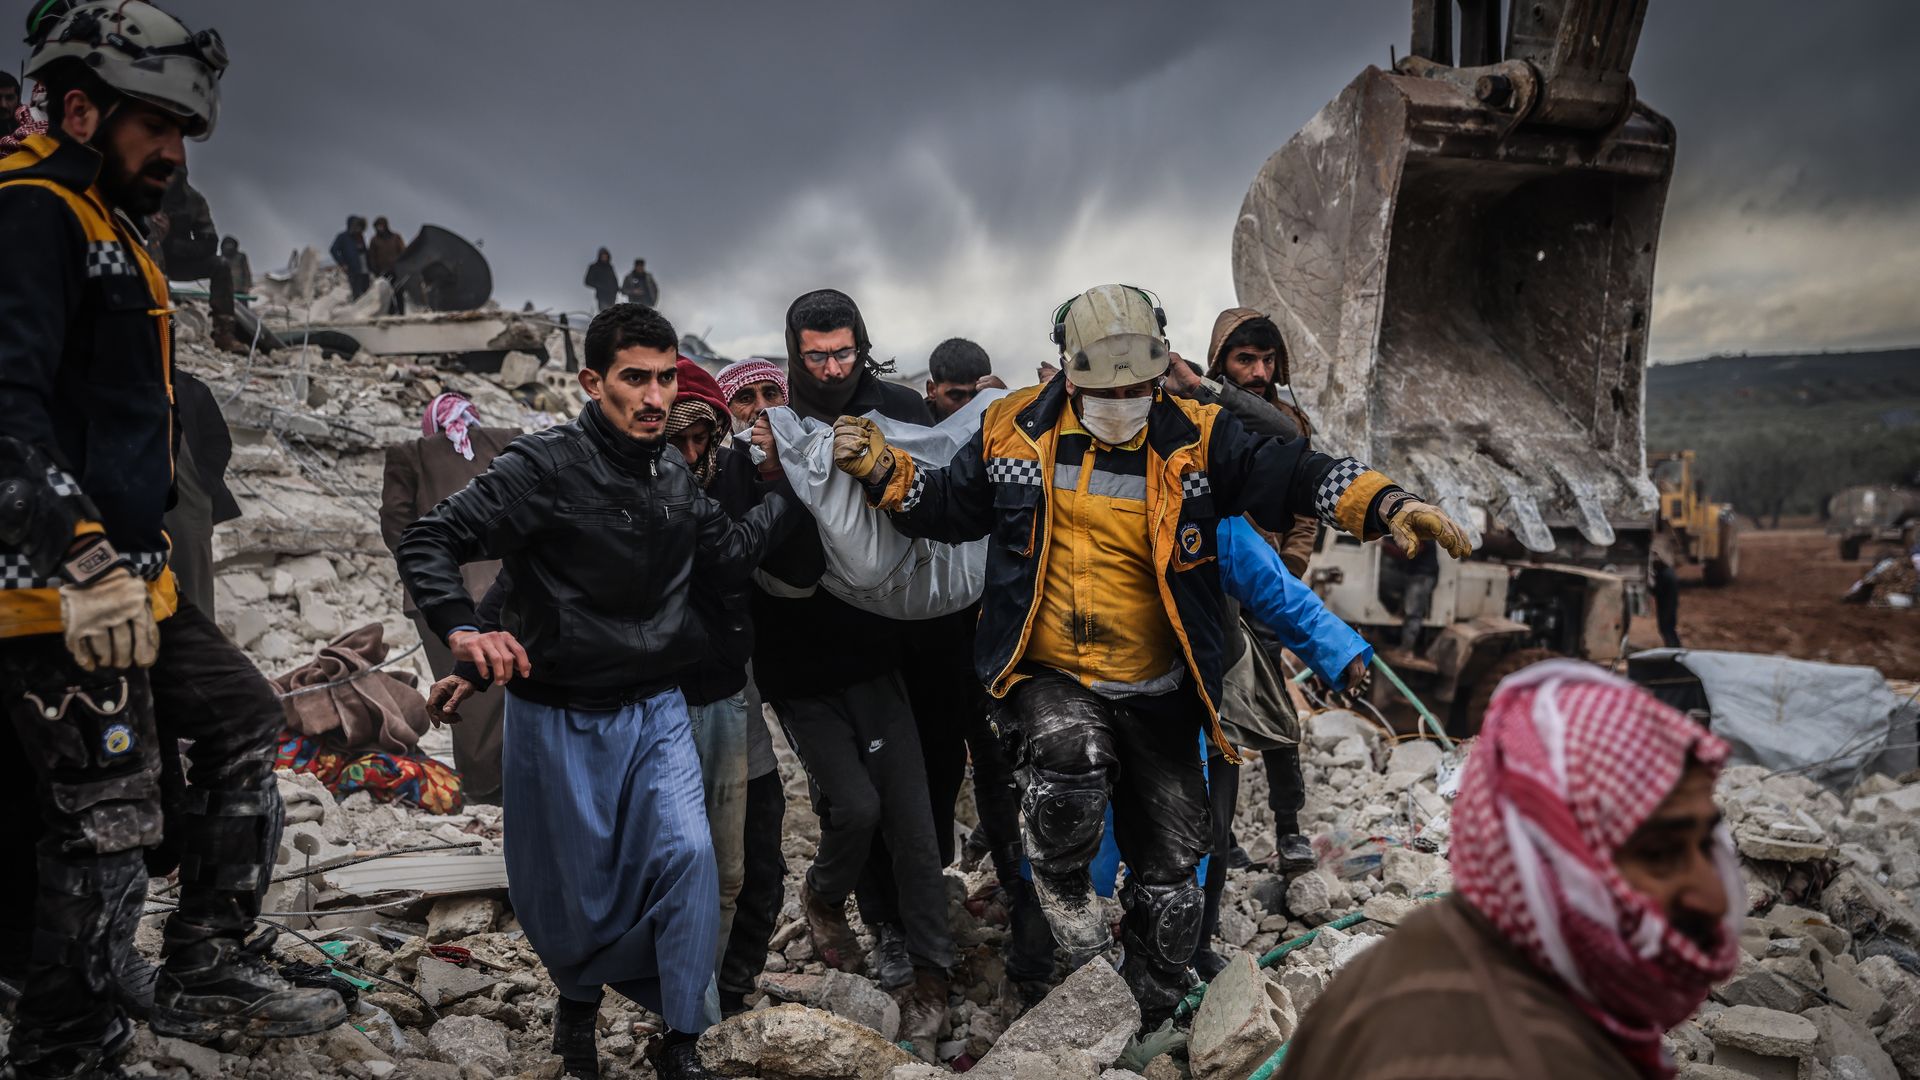 People walk through rubble after earthquake.